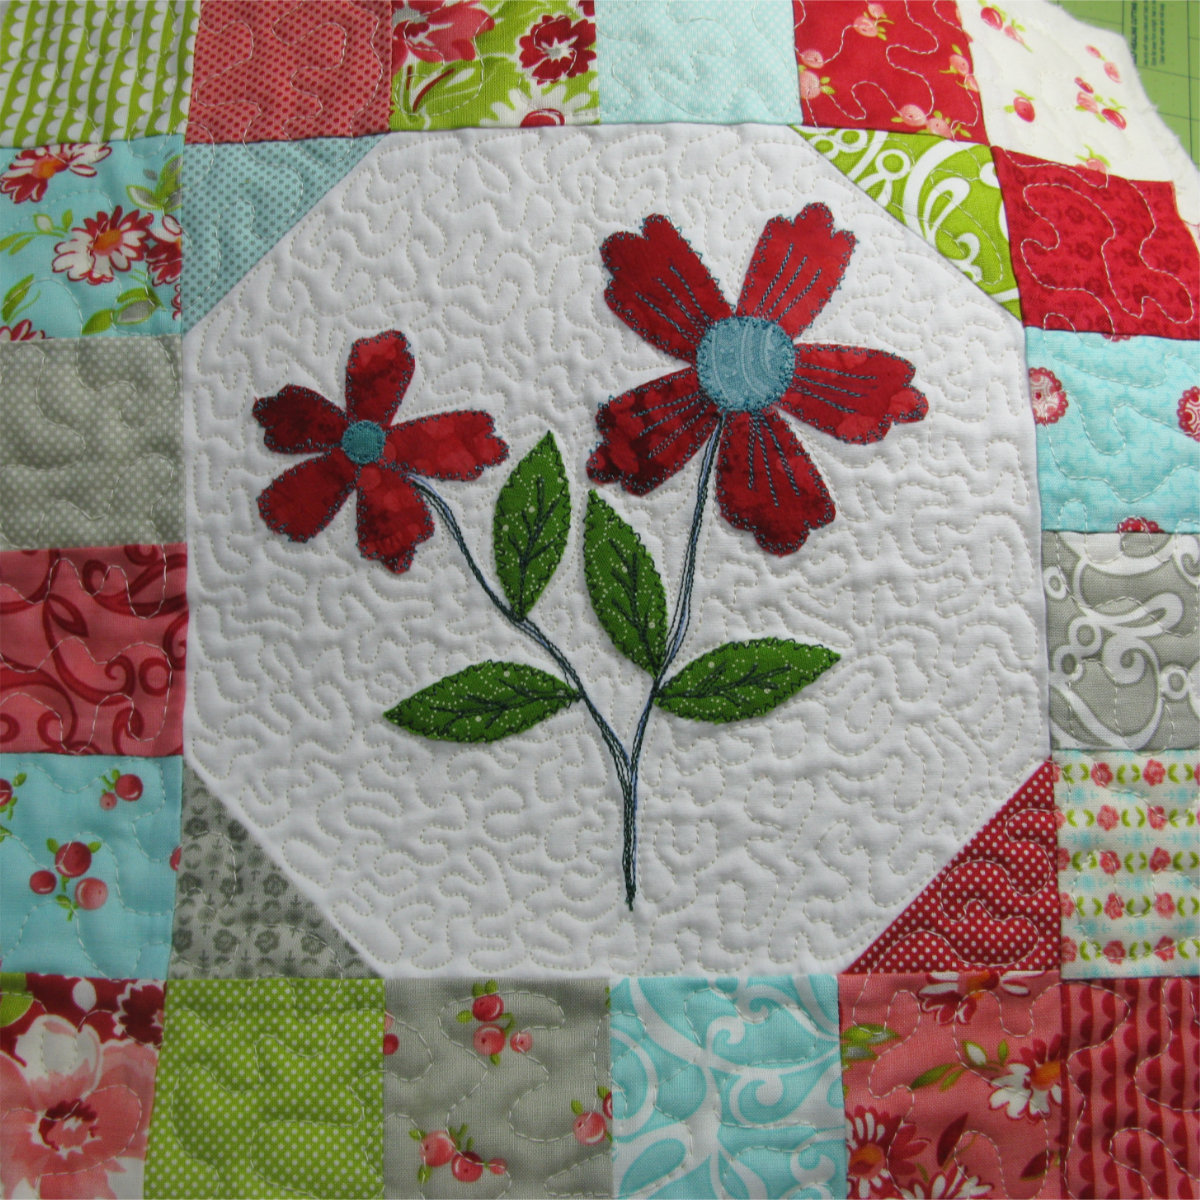 Closeup of the quilting